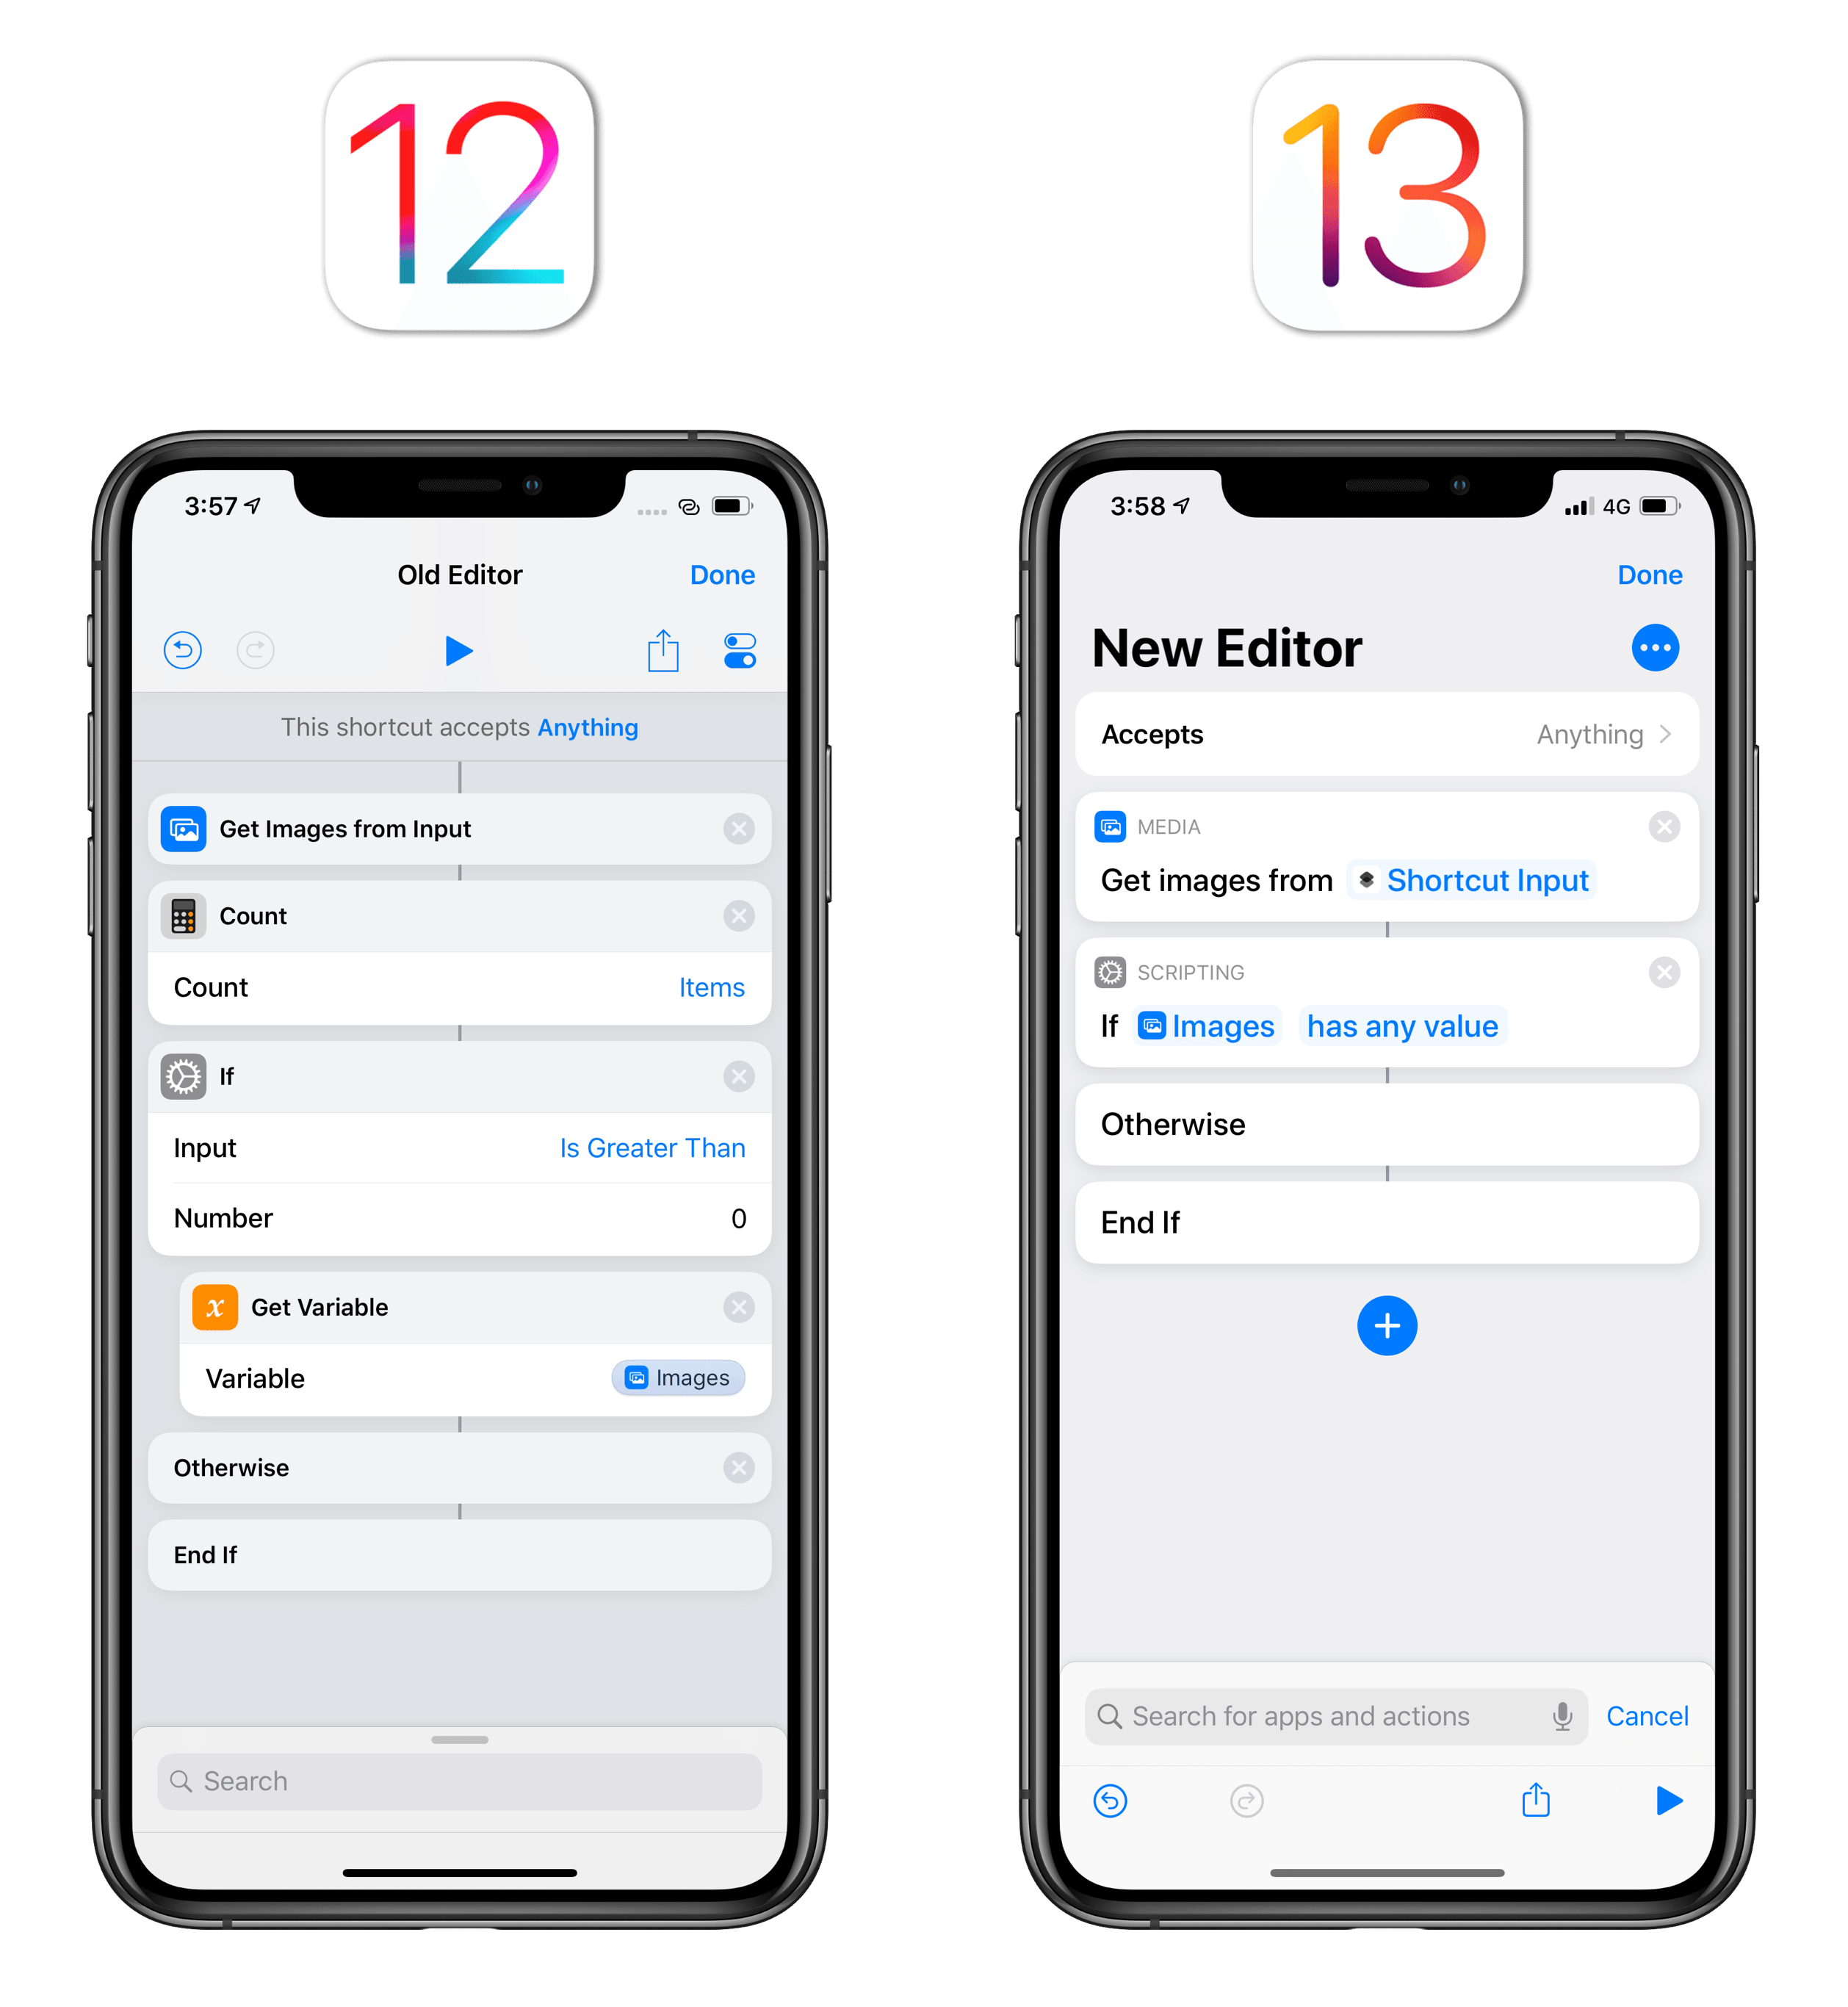 Checking for the existence of variables is much easier in iOS 13.